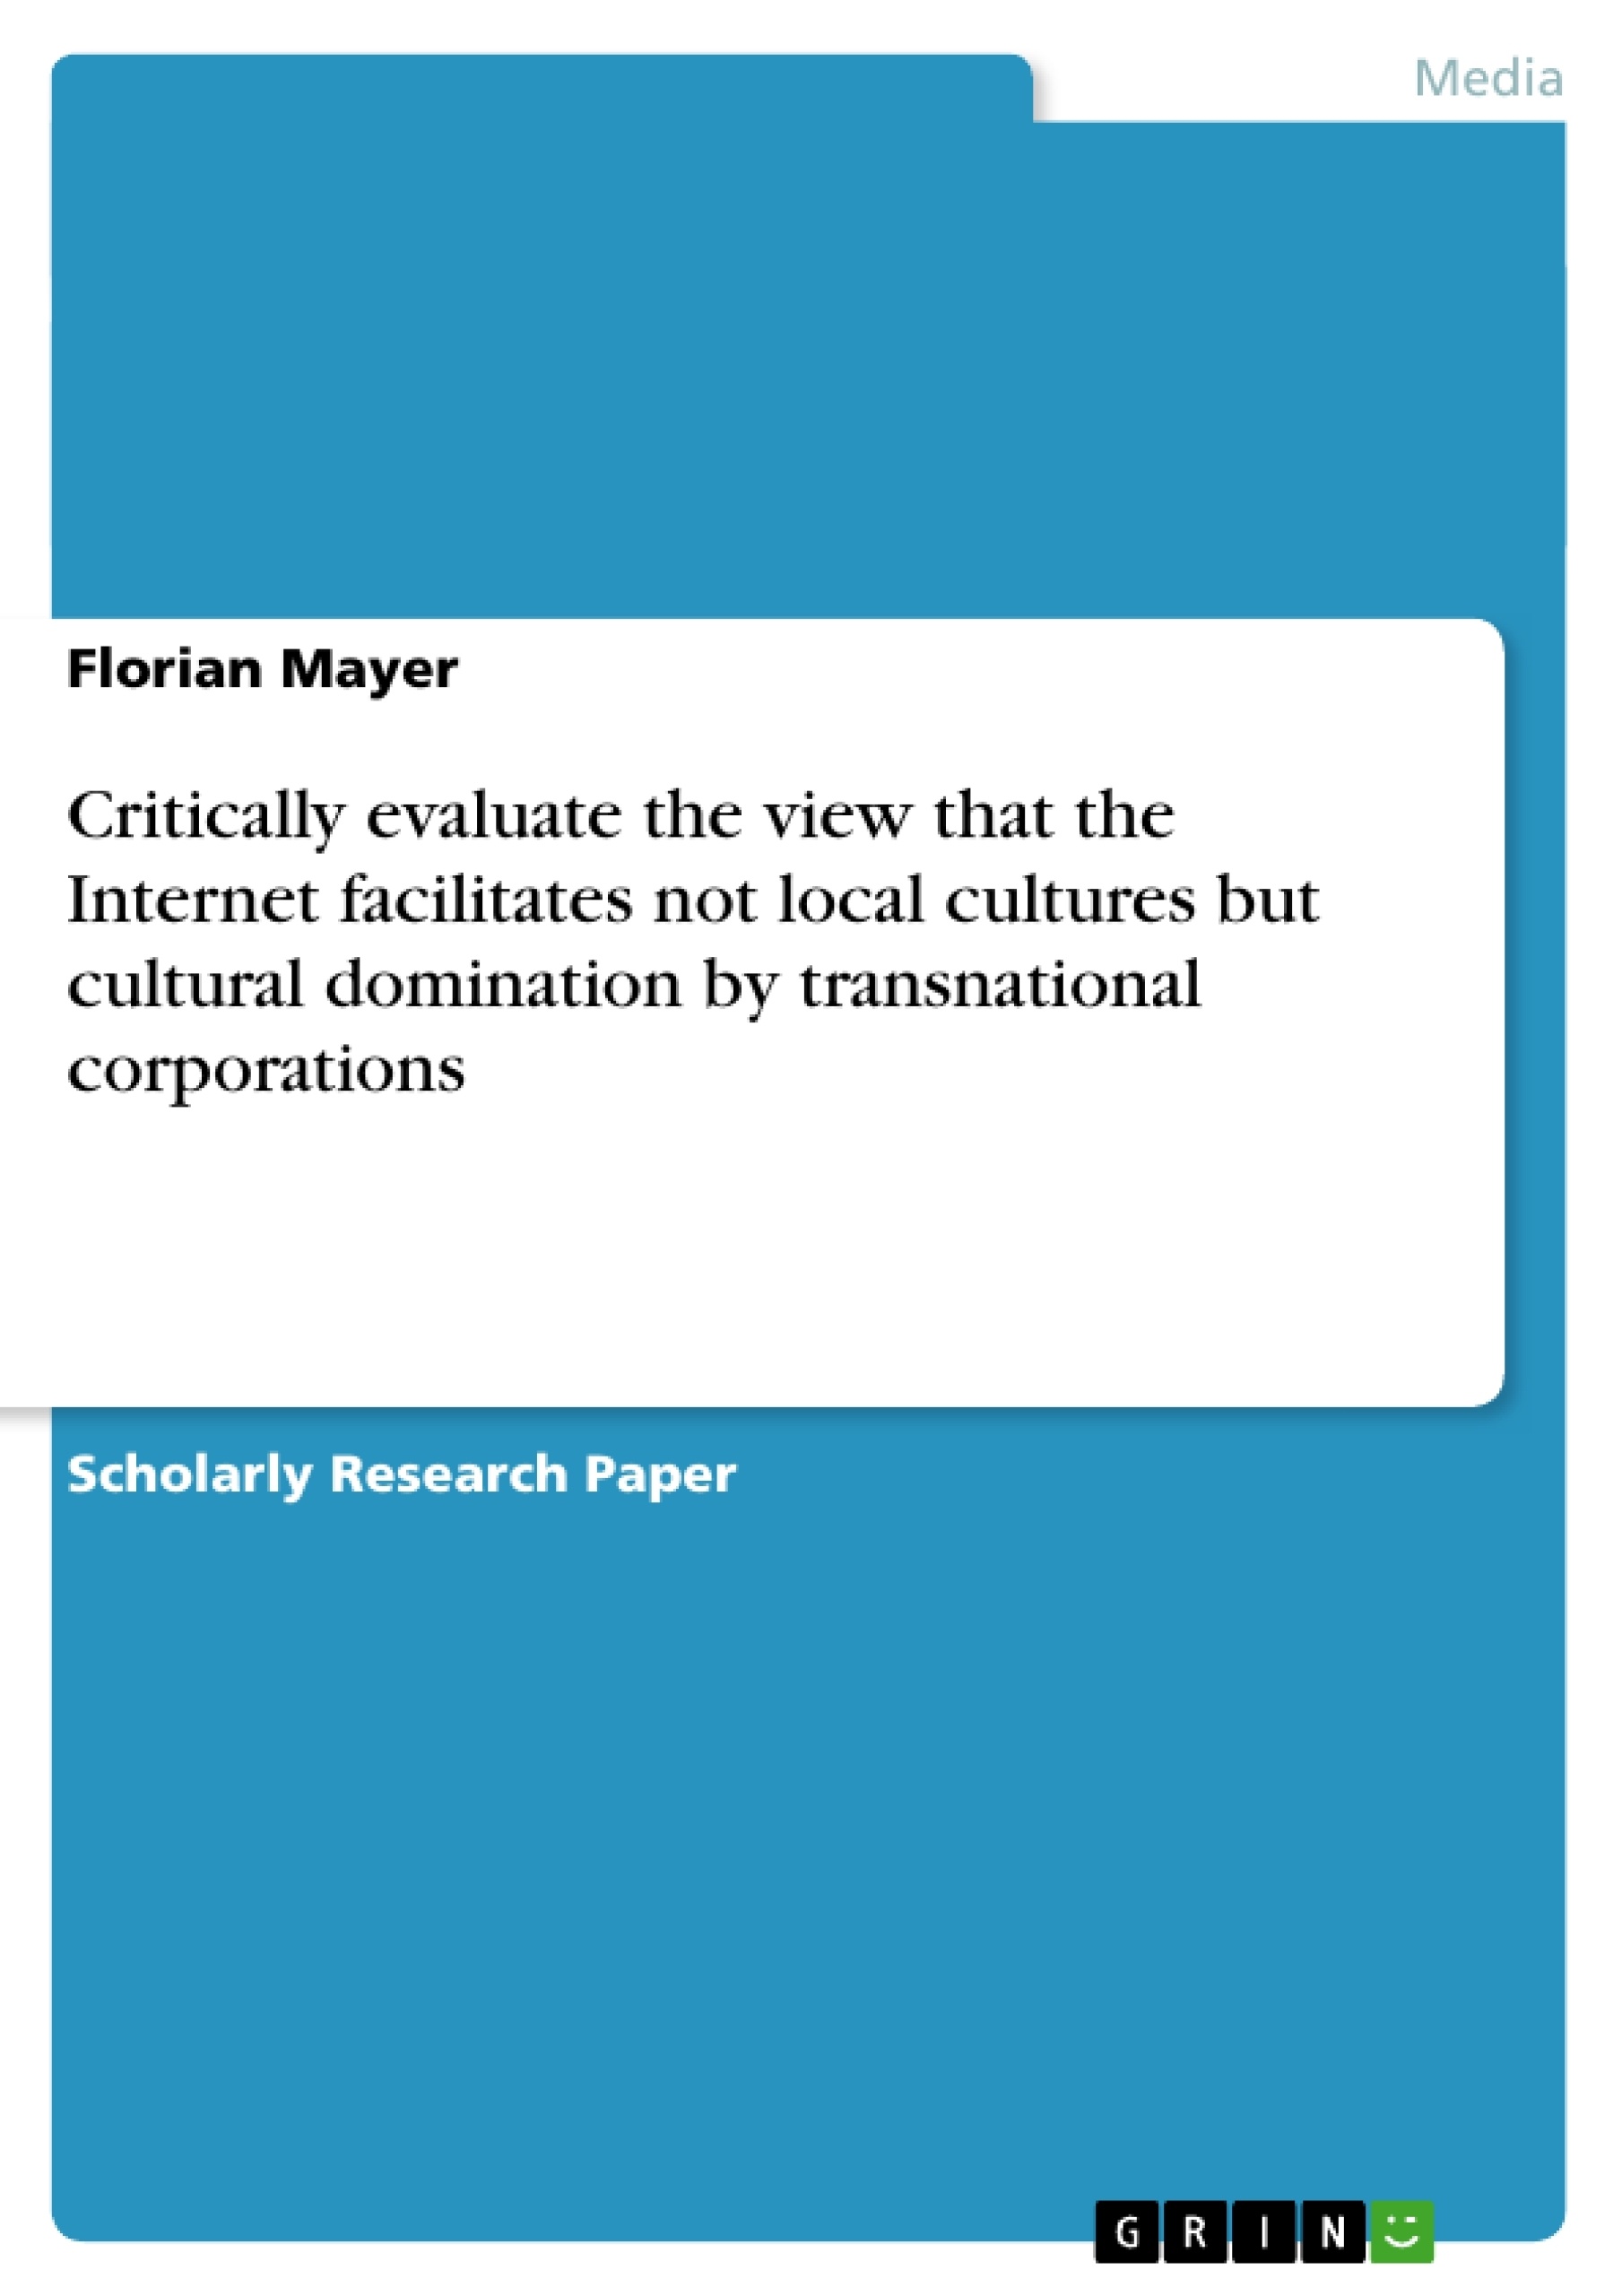 Title: Critically evaluate the view that the Internet facilitates not local cultures but cultural domination by transnational corporations